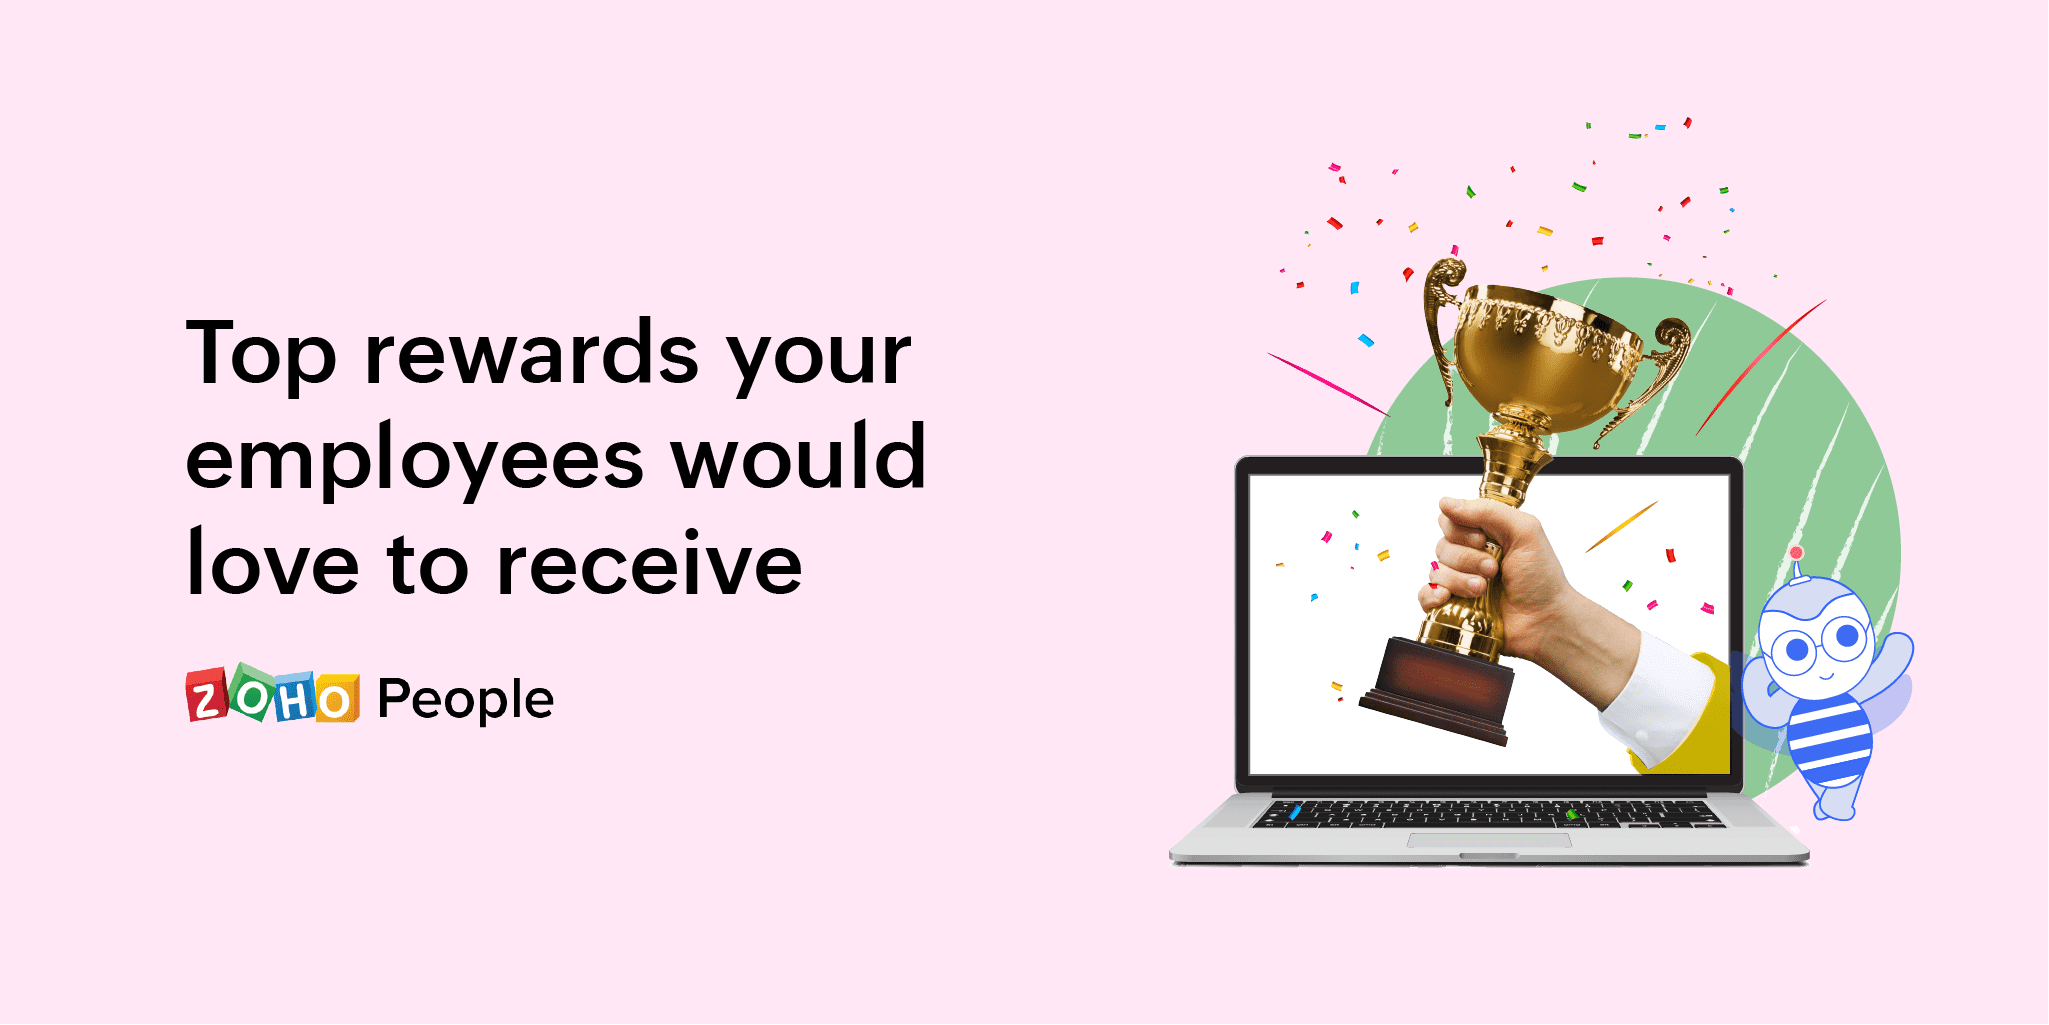 Top rewards your employees would love to receive